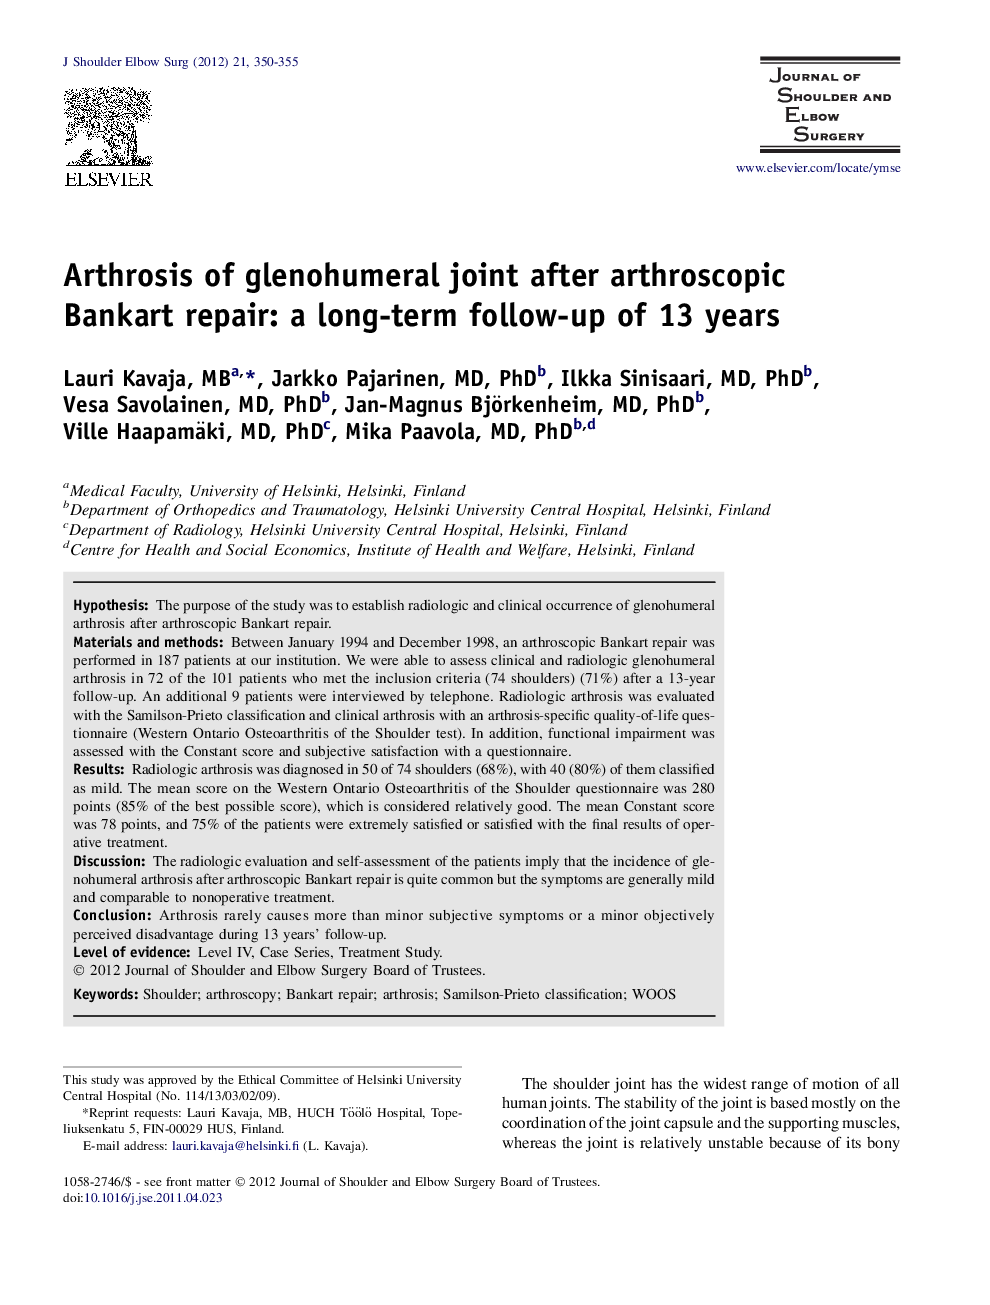 Arthrosis of glenohumeral joint after arthroscopic Bankart repair: a long-term follow-up of 13 years 